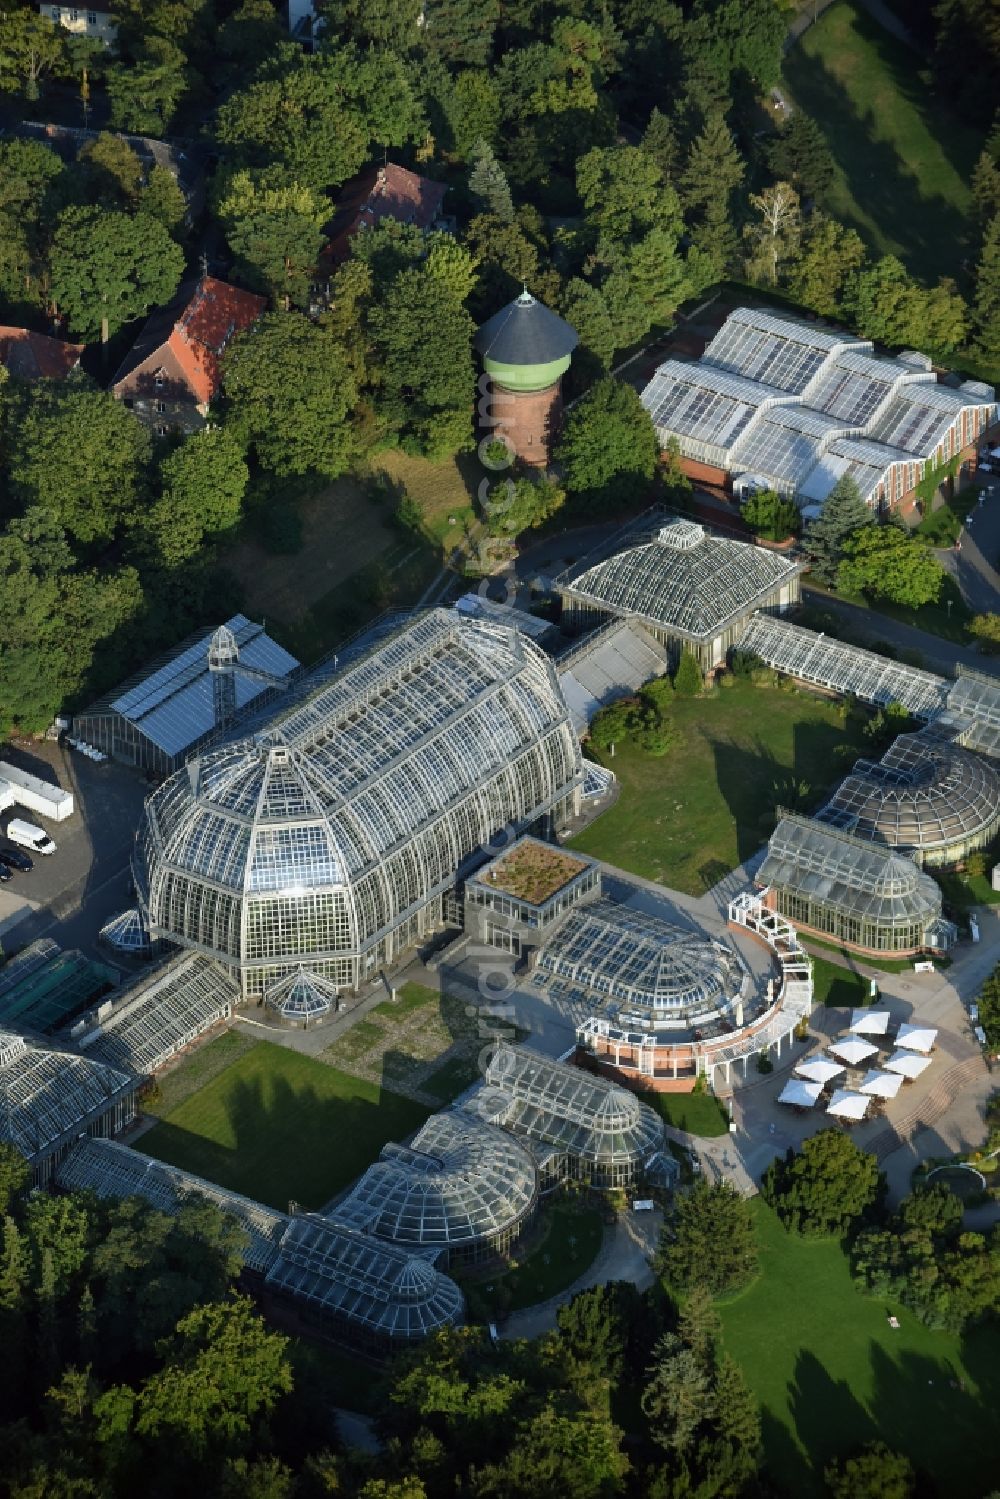 Aerial image Berlin - Main building and greenhouse complex of the Botanical Gardens Berlin-Dahlem in Berlin. The historical glass buildings and greenhouses are dedicated to different areas. The Large Tropical House and the Victoria-House are located in the center